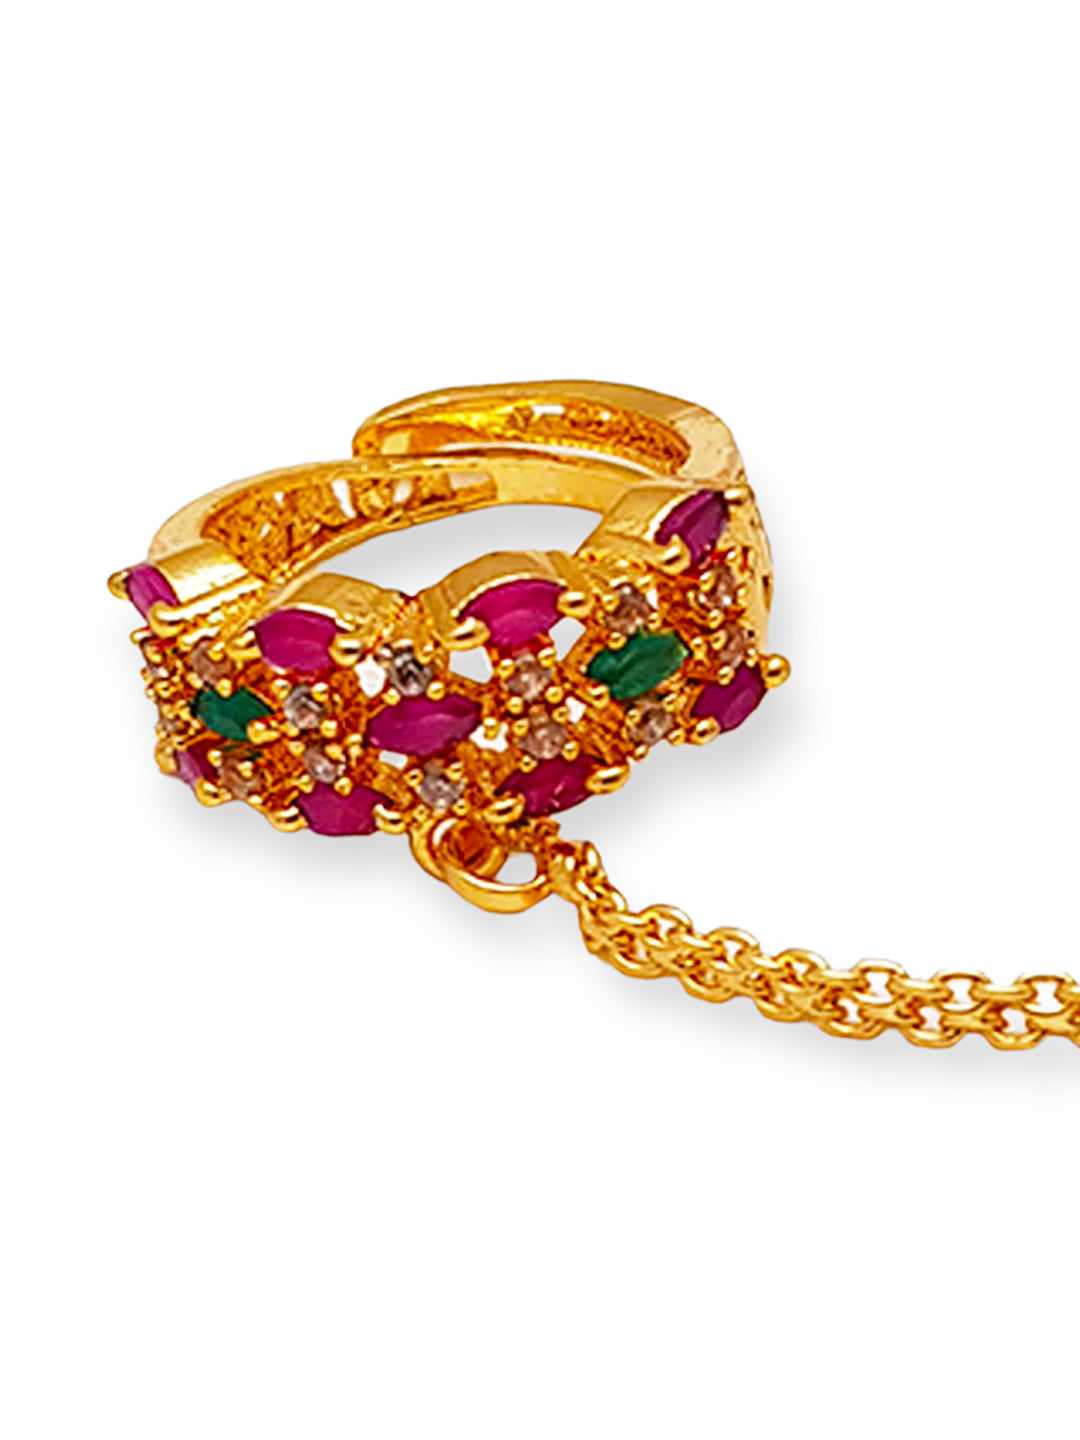 Gold Plated Adjustable Size Cocktail Finger ring with Bracelet free size Zercon ruby Stones 7449N